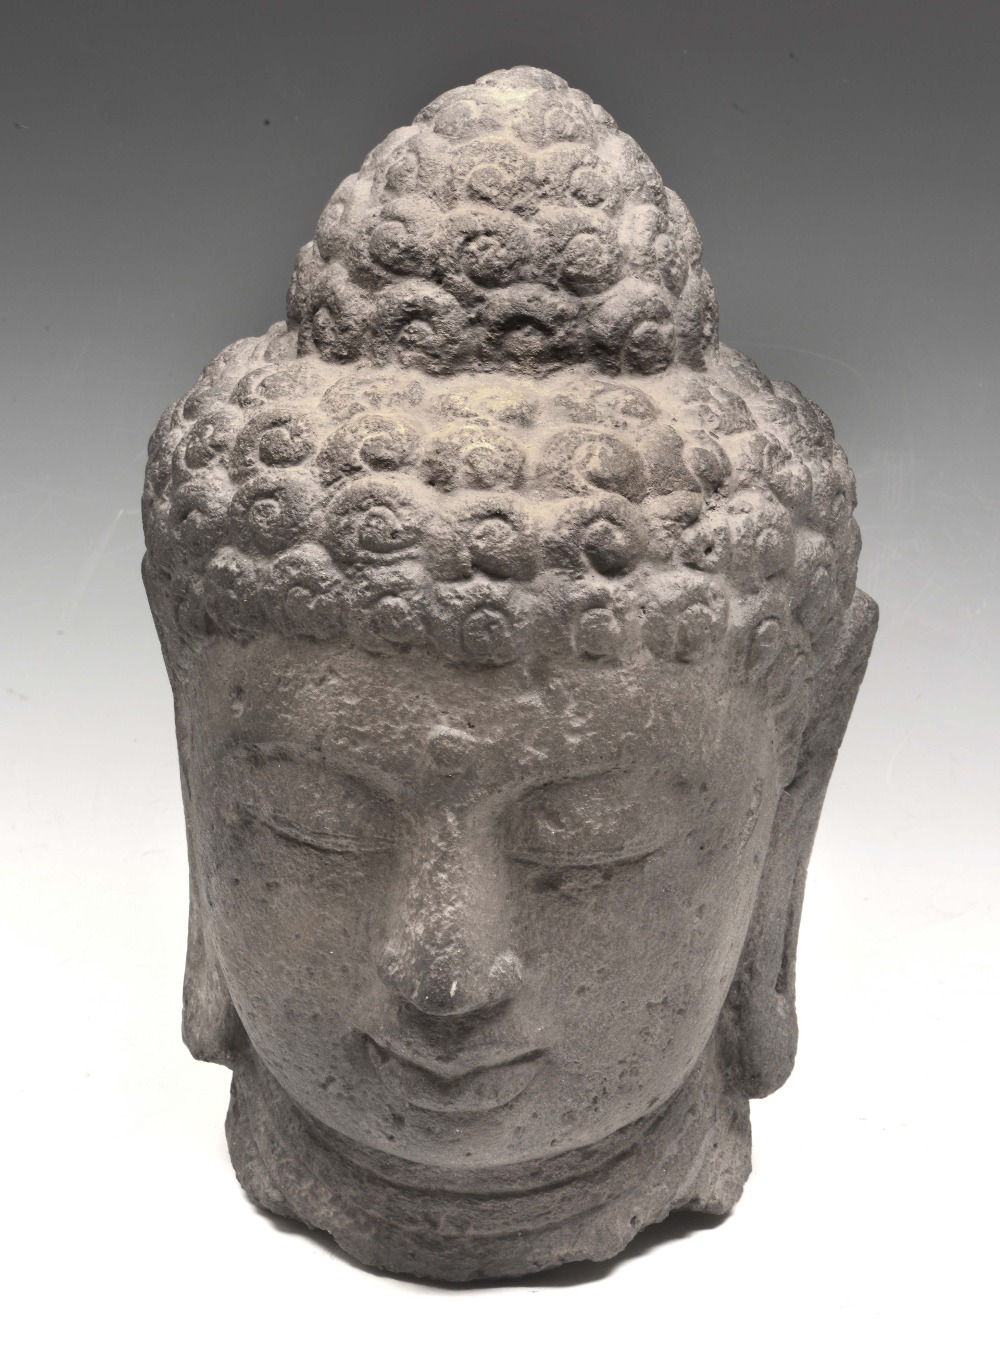 A LARGE STONE HEAD OF JINA OR BUDDHA, possibly Indonesian, well carved with face in a pleasant